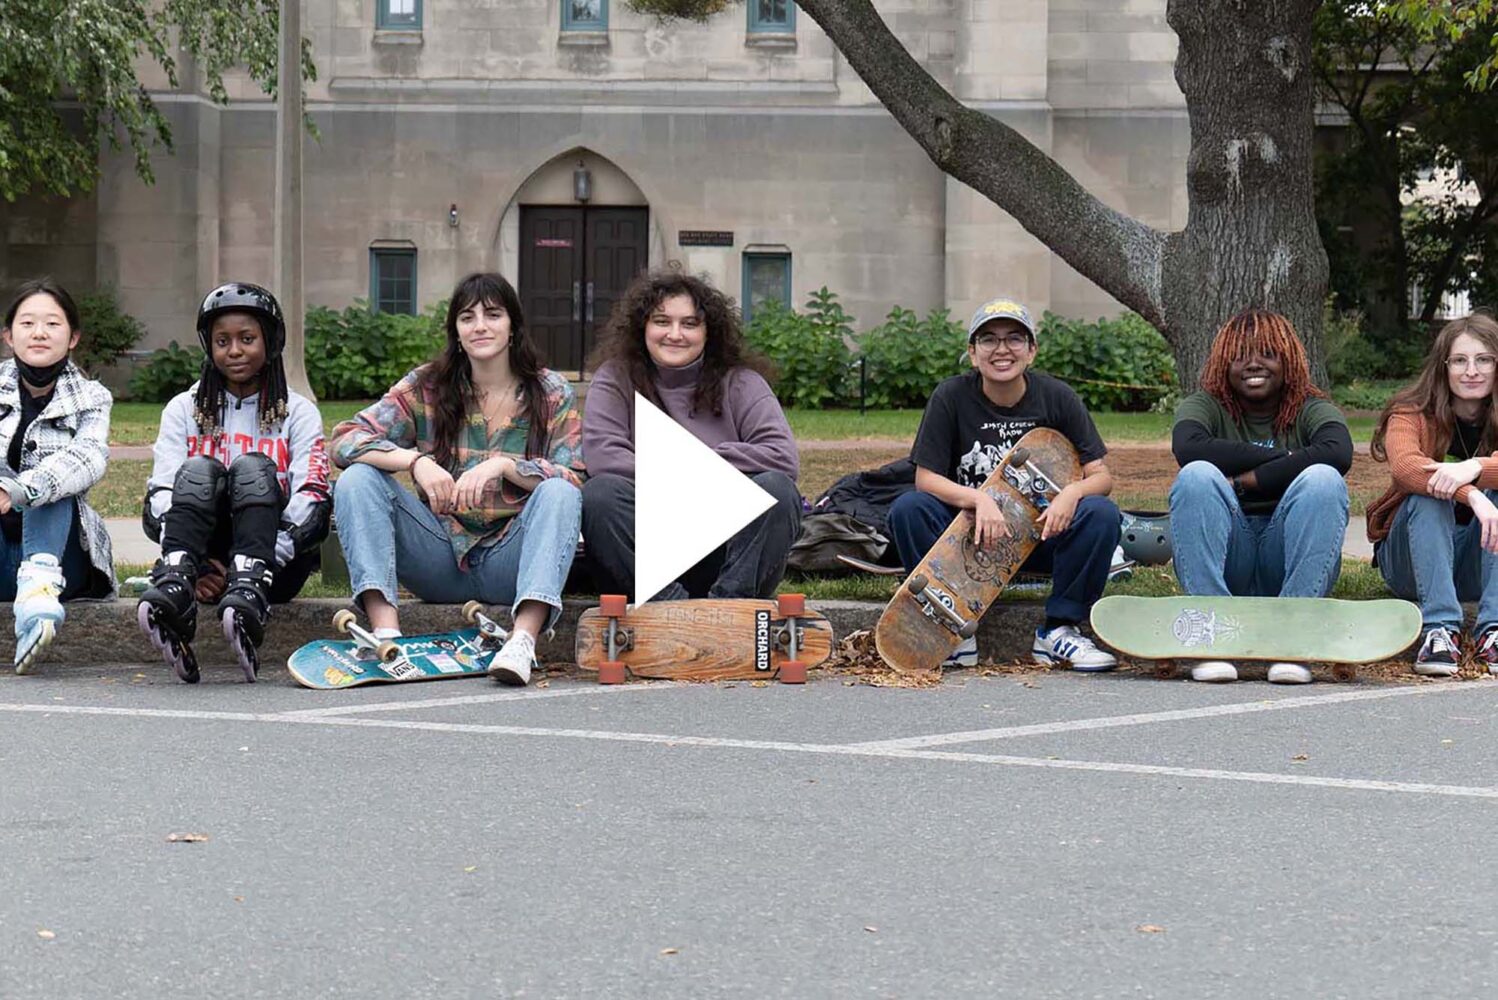 Photo: The BU Girls' Skateboarding Club poses for a photo along the BU Beach, an outdoor area where BU students can relax and unwind outside. A video play button overlay rests on top of the photo.